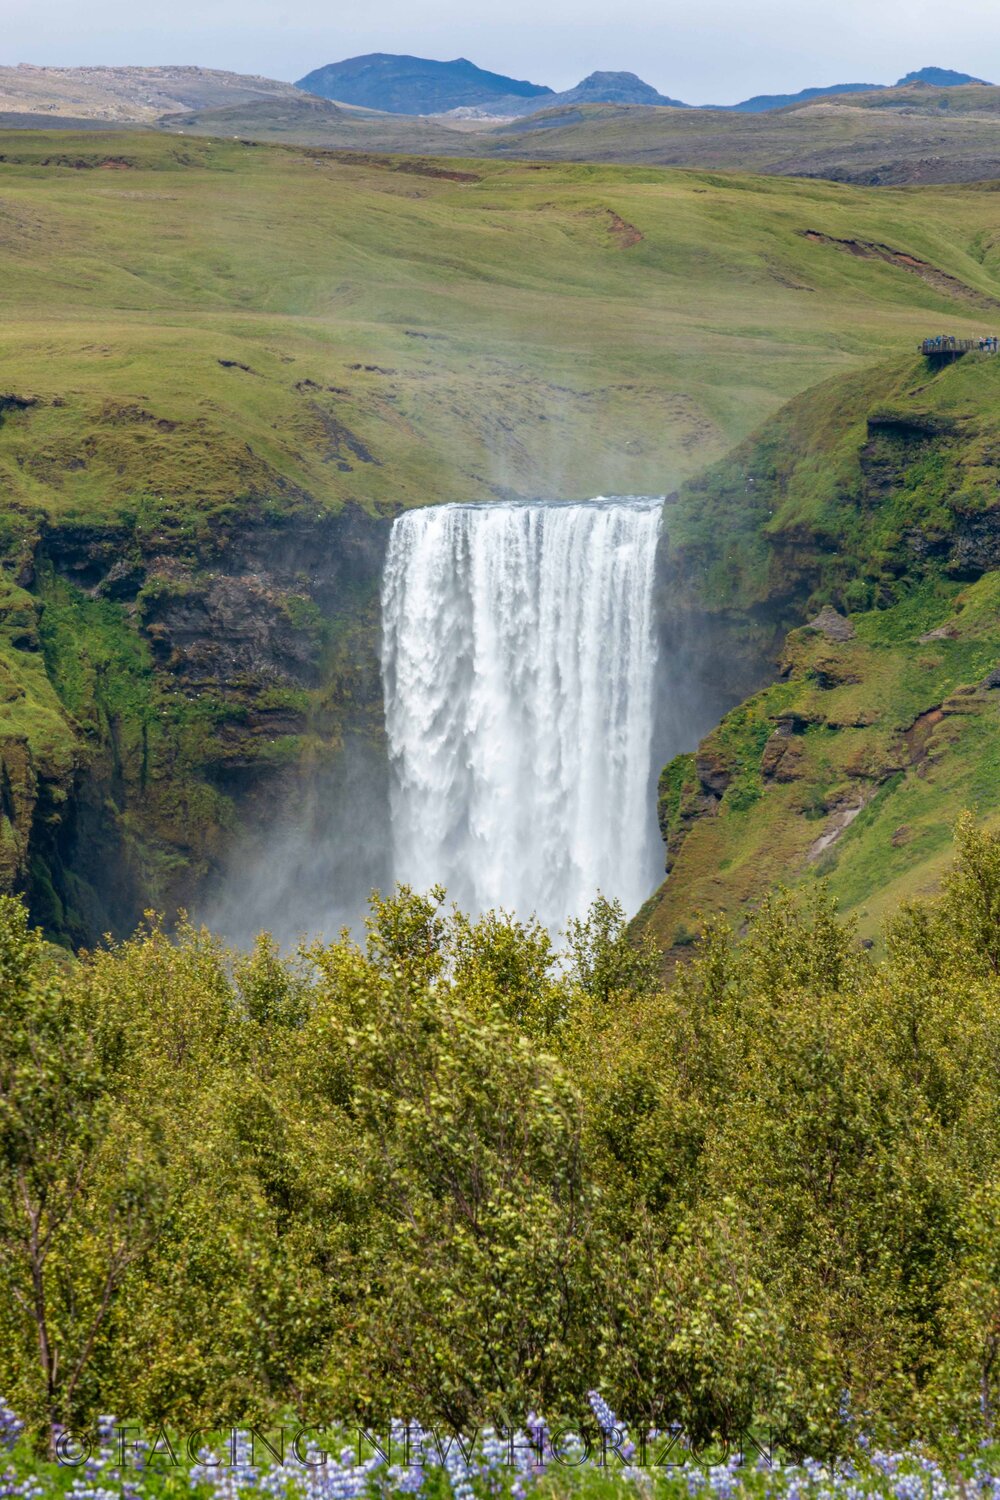  Skógafoss and the surrounding landscape. So beautiful 